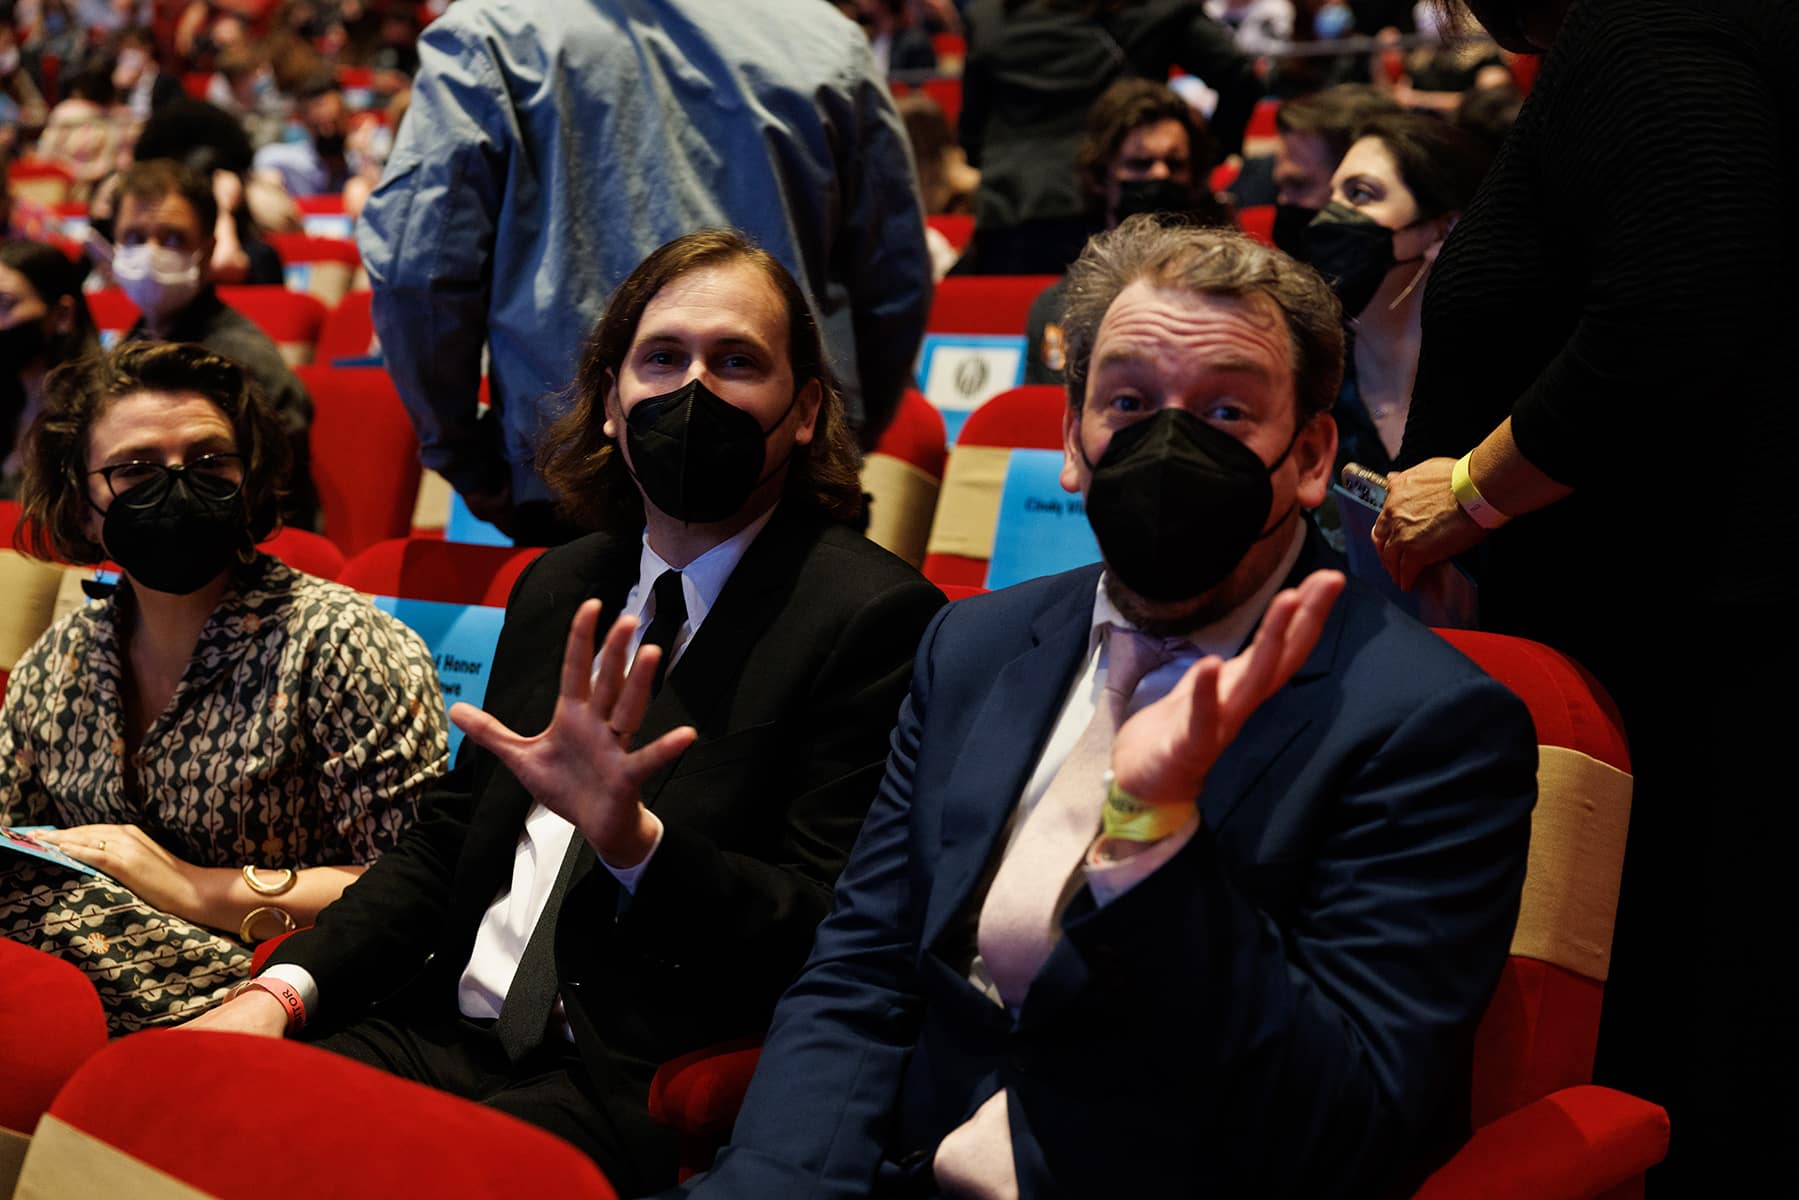 The two, seated and wearing masks, wave at the camera.